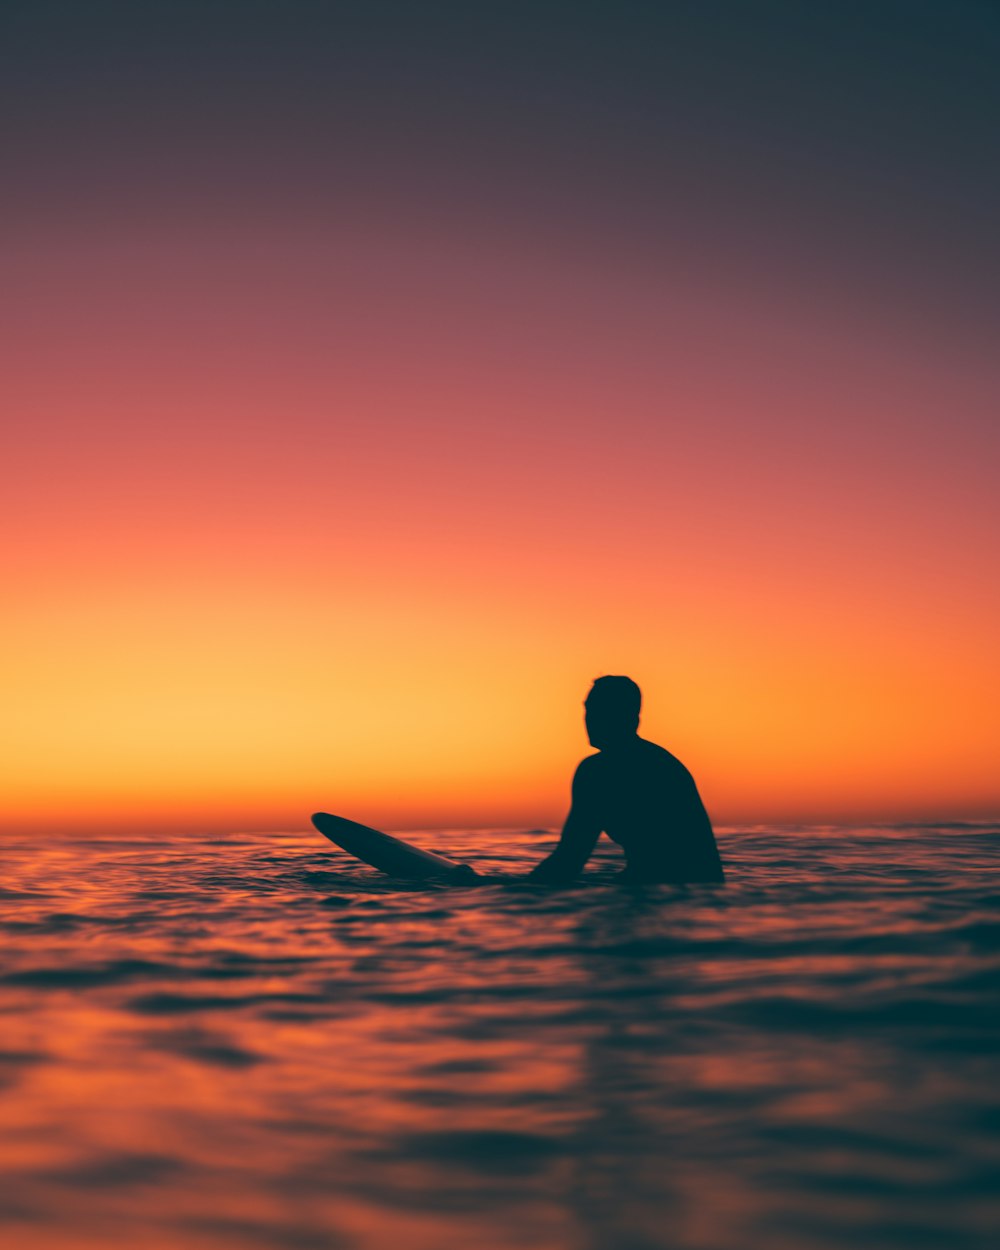 a man sitting on a surfboard in the ocean at sunset